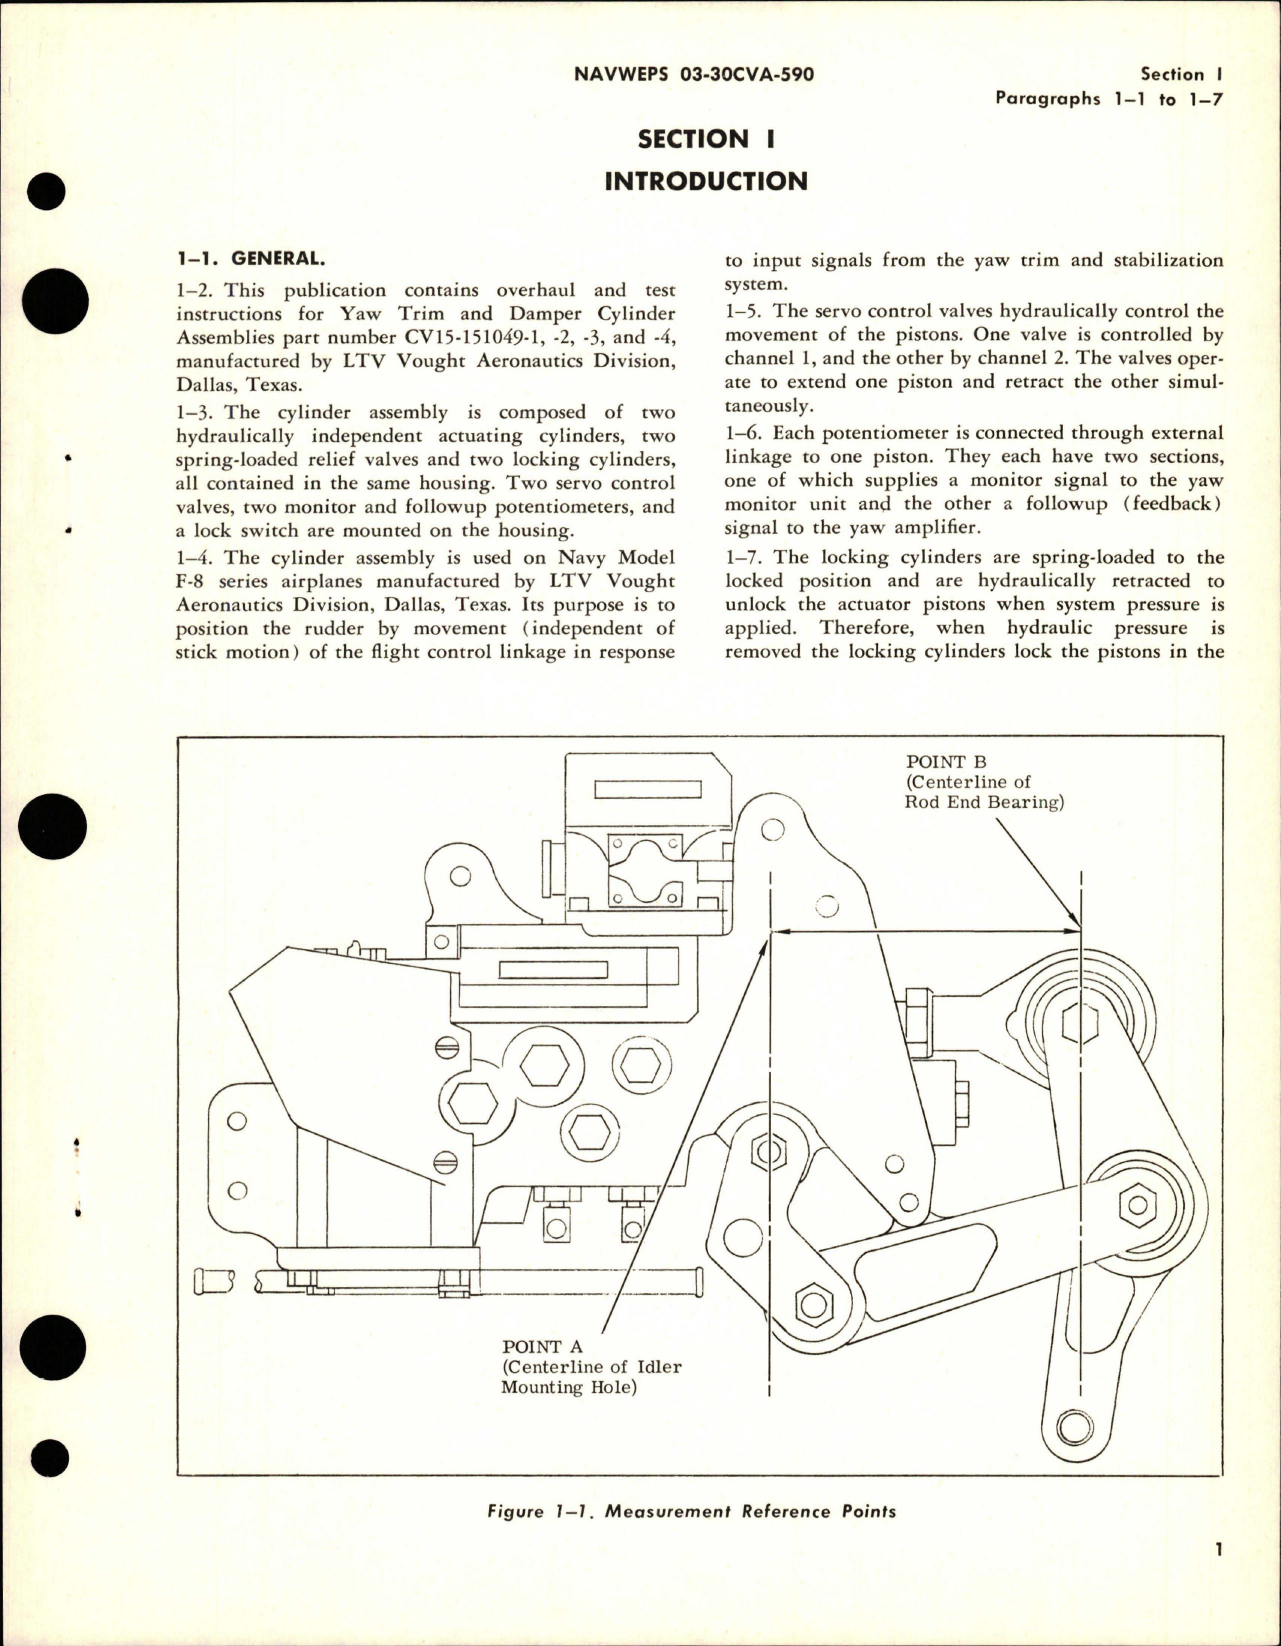 Sample page 5 from AirCorps Library document: Overhaul Instructions for Yaw Trim and Damper Cylinder Assembly